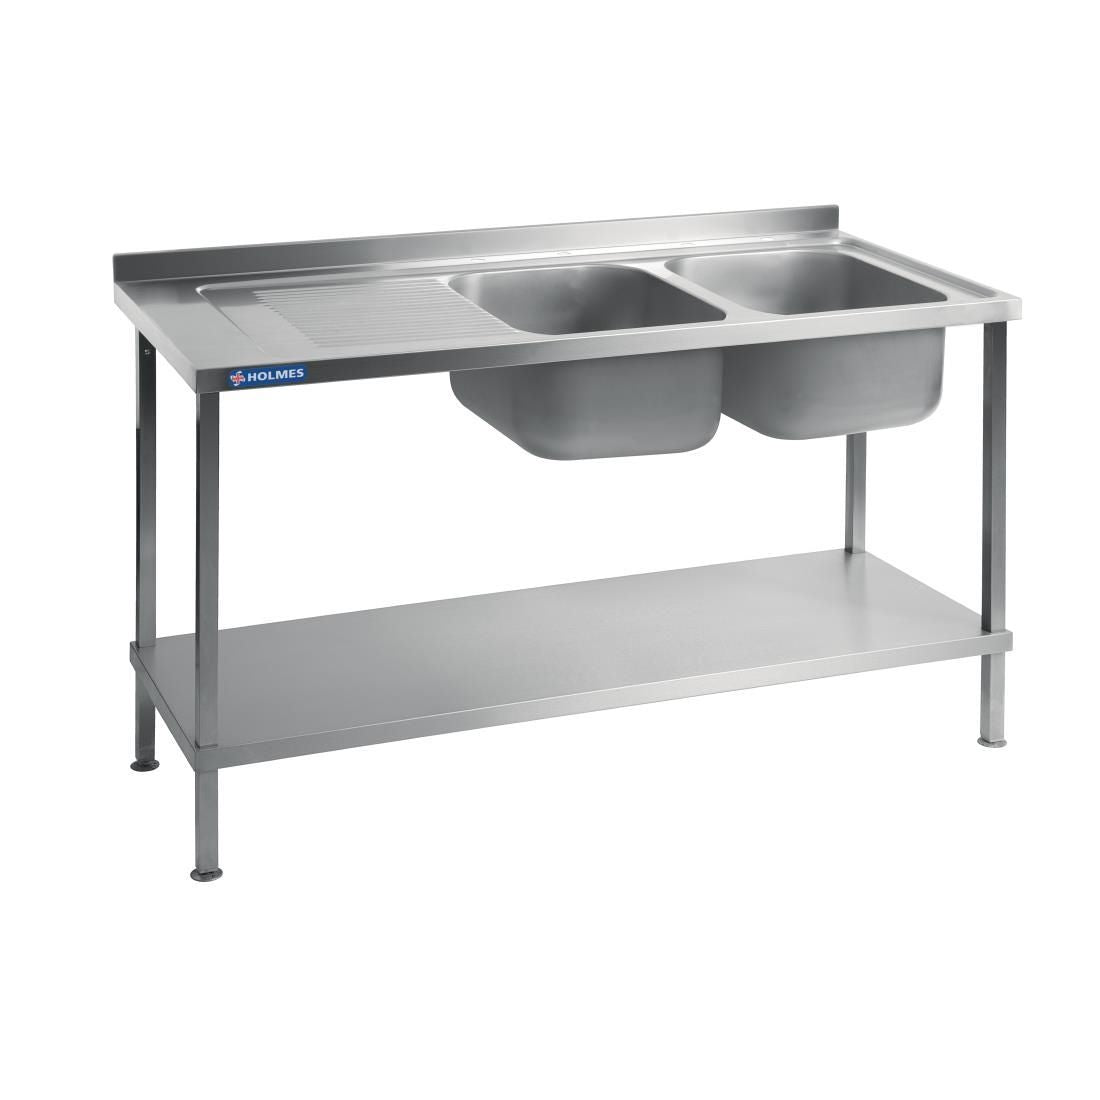 Holmes Self Assembly Stainless Steel Sink Left Hand Drainer 1800mm - DR373